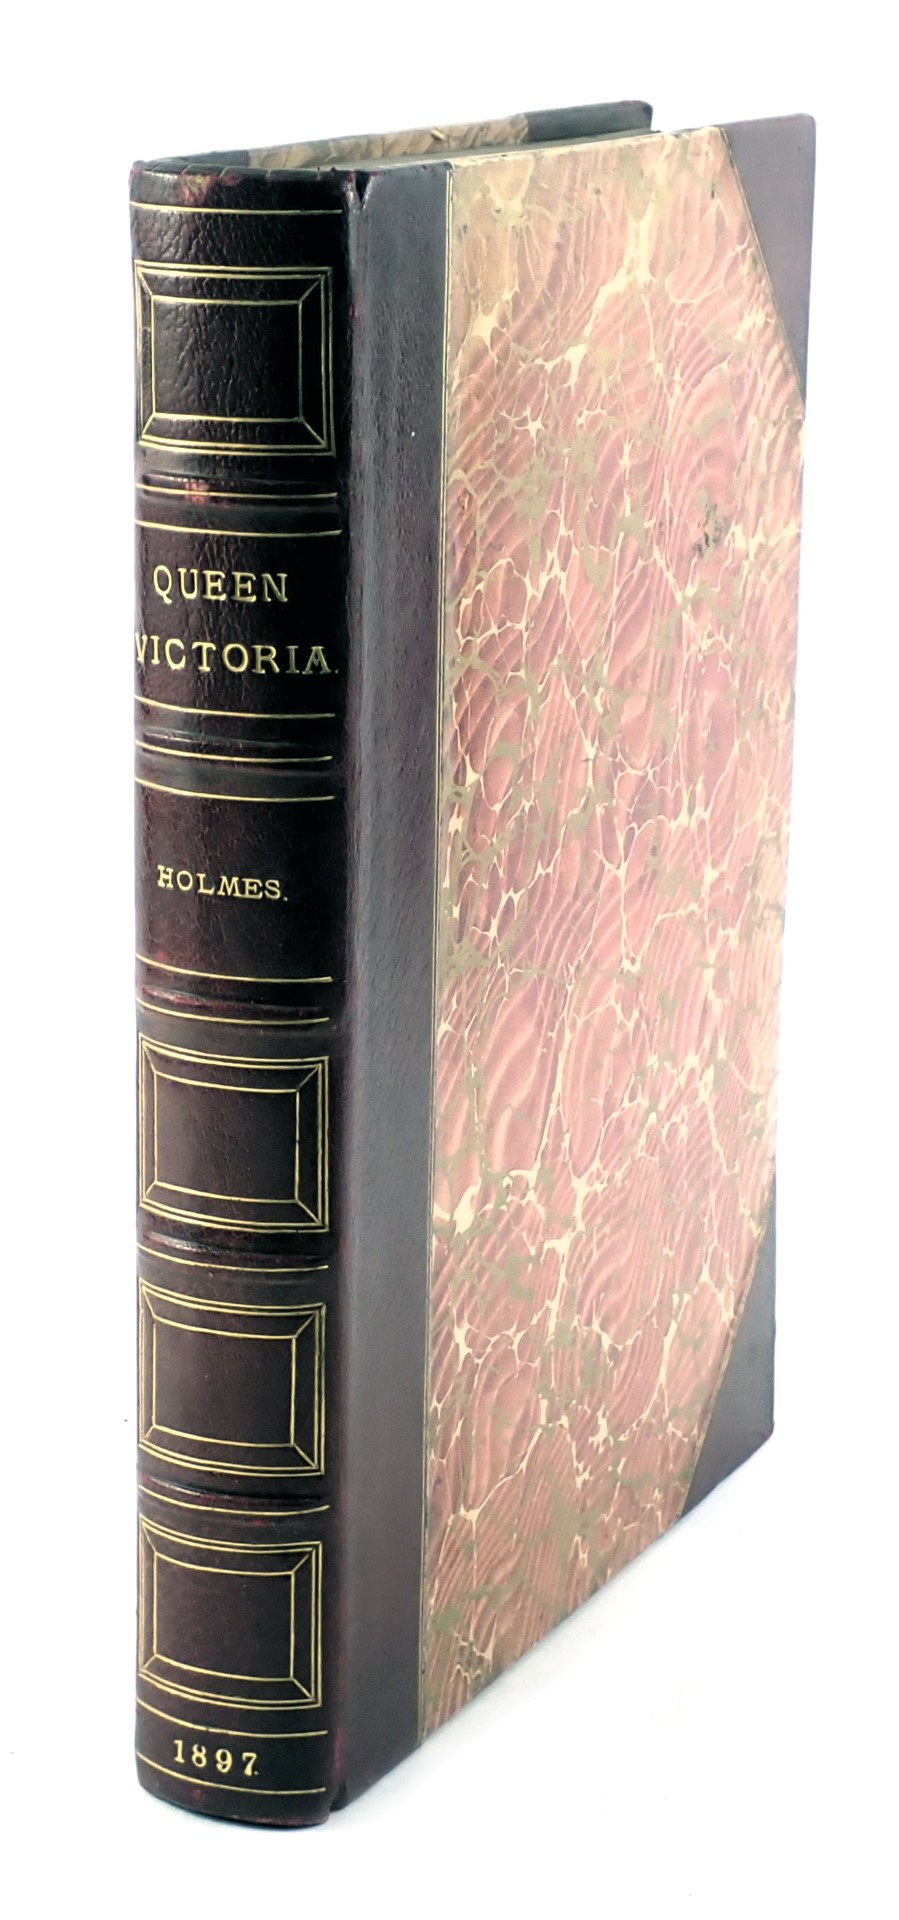 Holmes (Richard R). Queen Victoria, published by Boussod, Valadon & Co 1897, in leather binding with